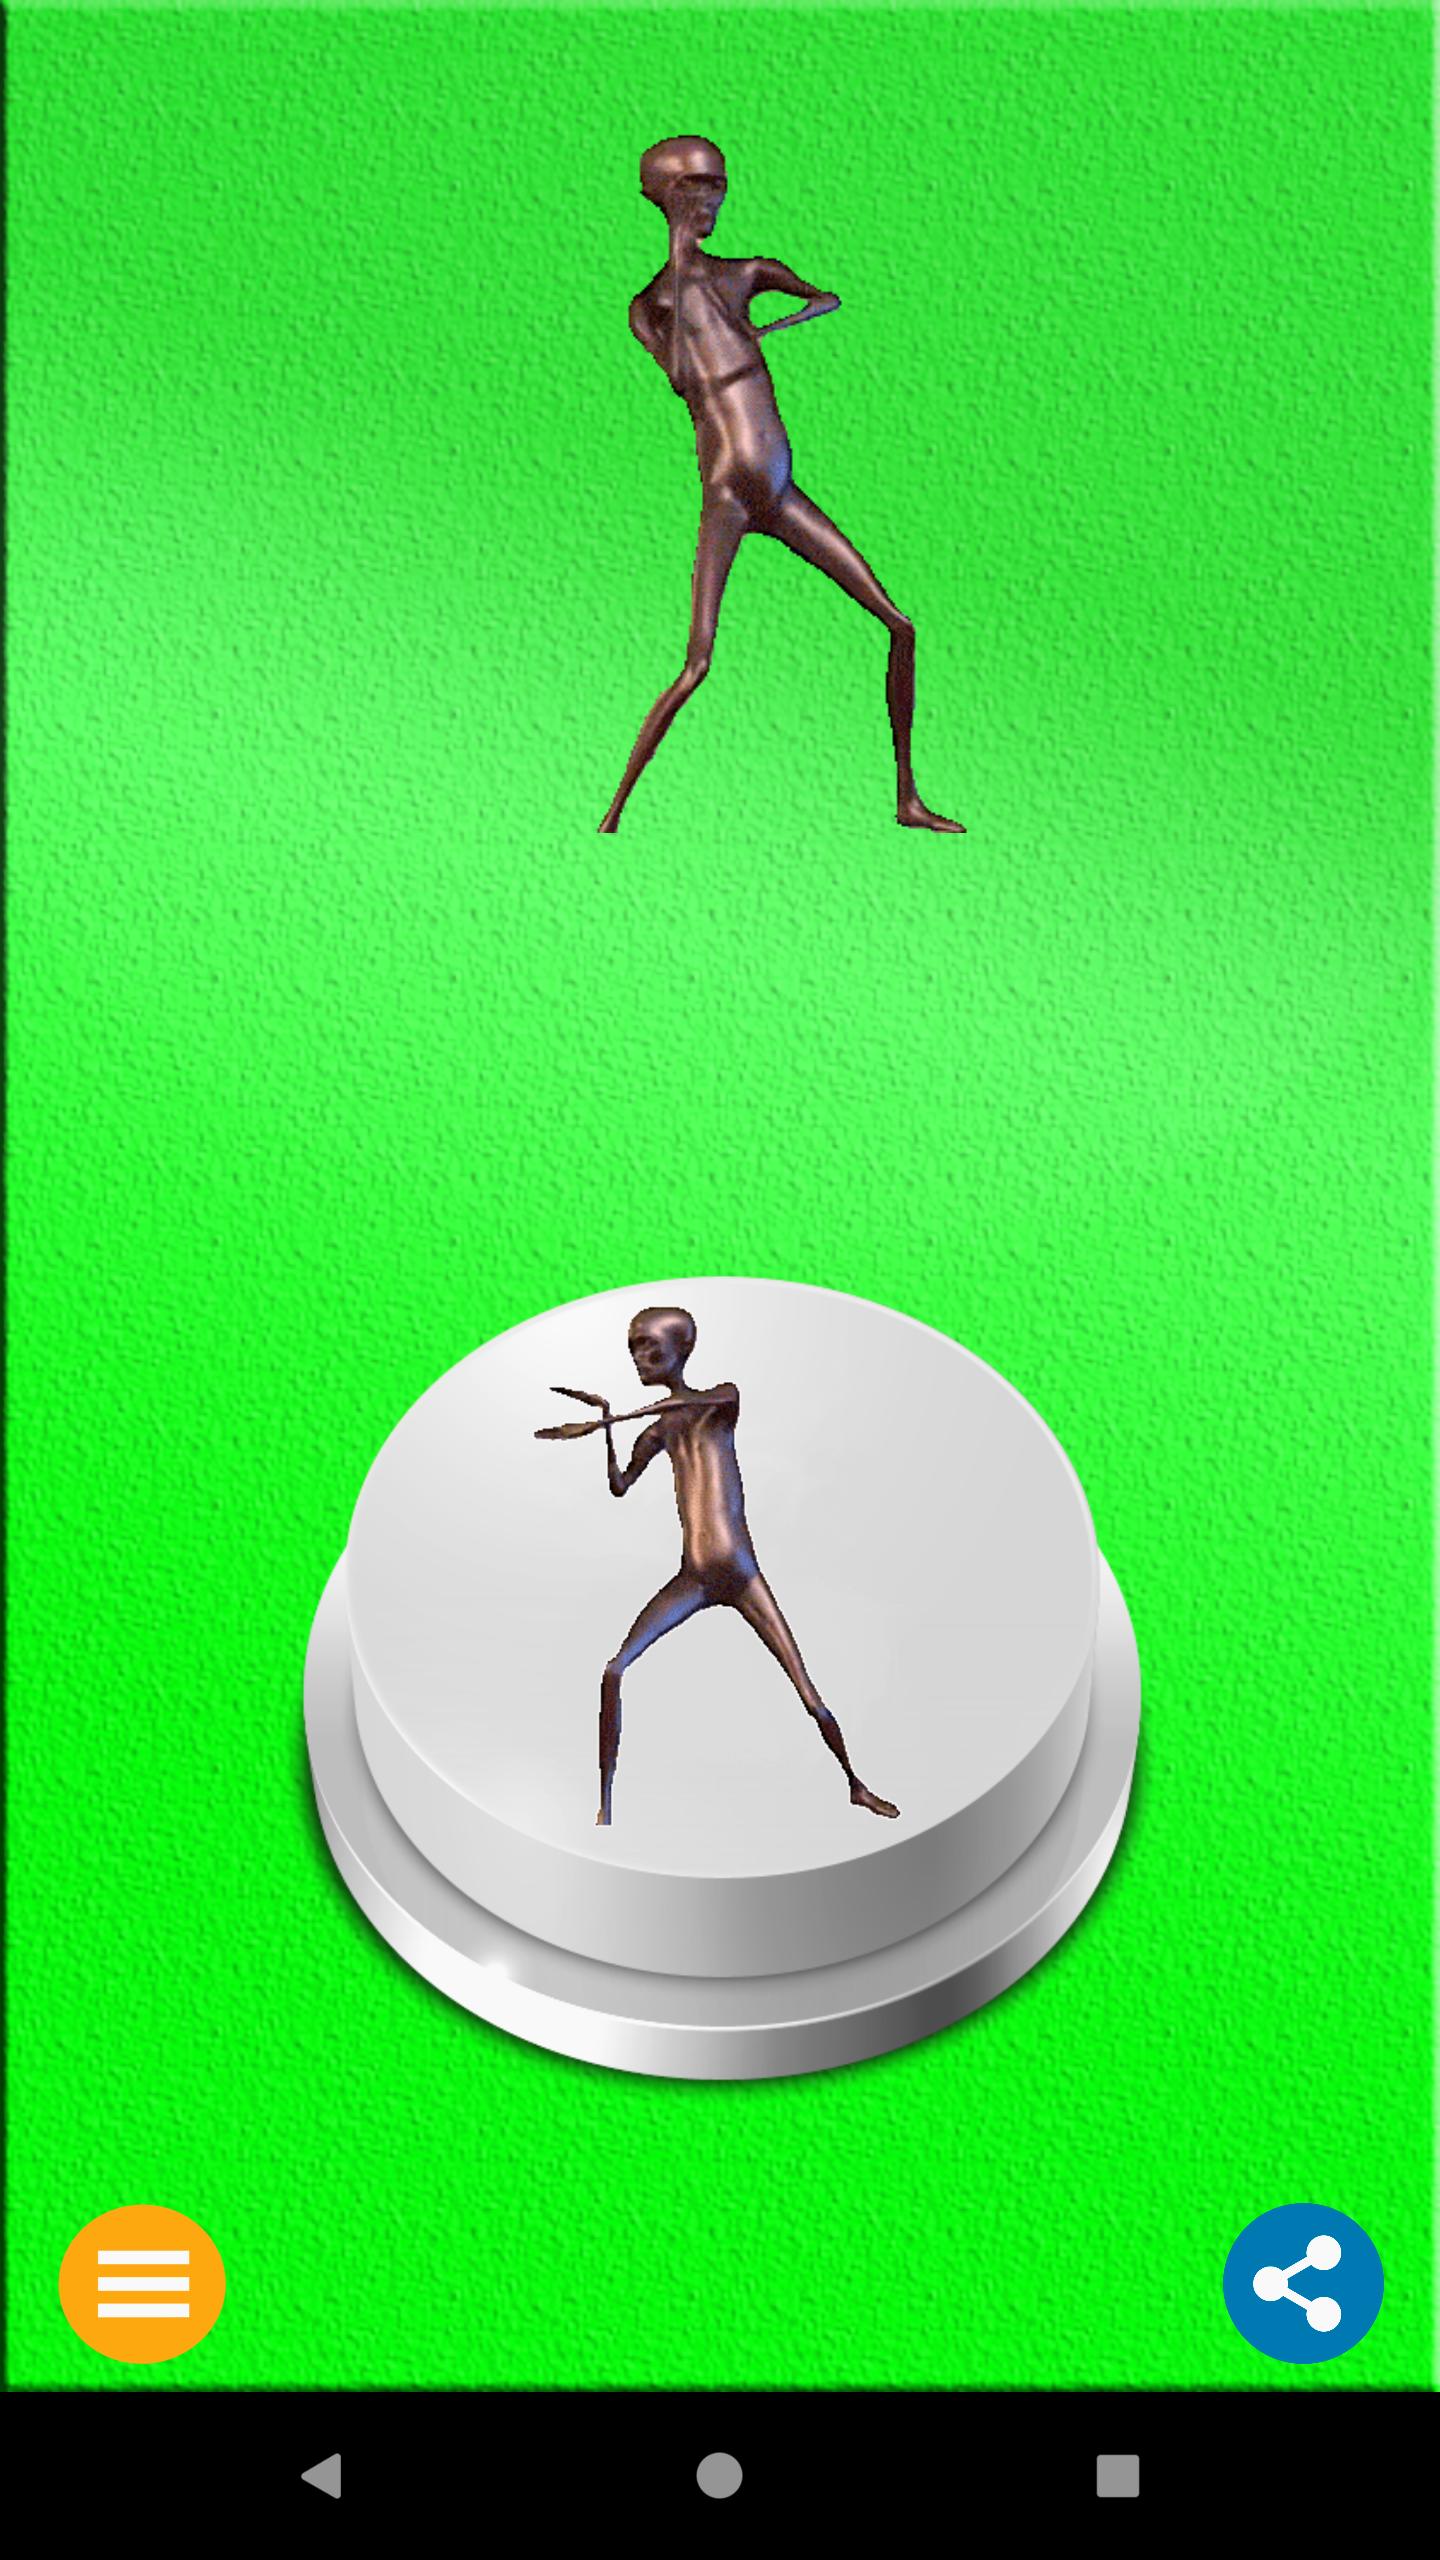 Howard The Alien Meme Prank Button For Android Apk Download - howard the alien roblox game